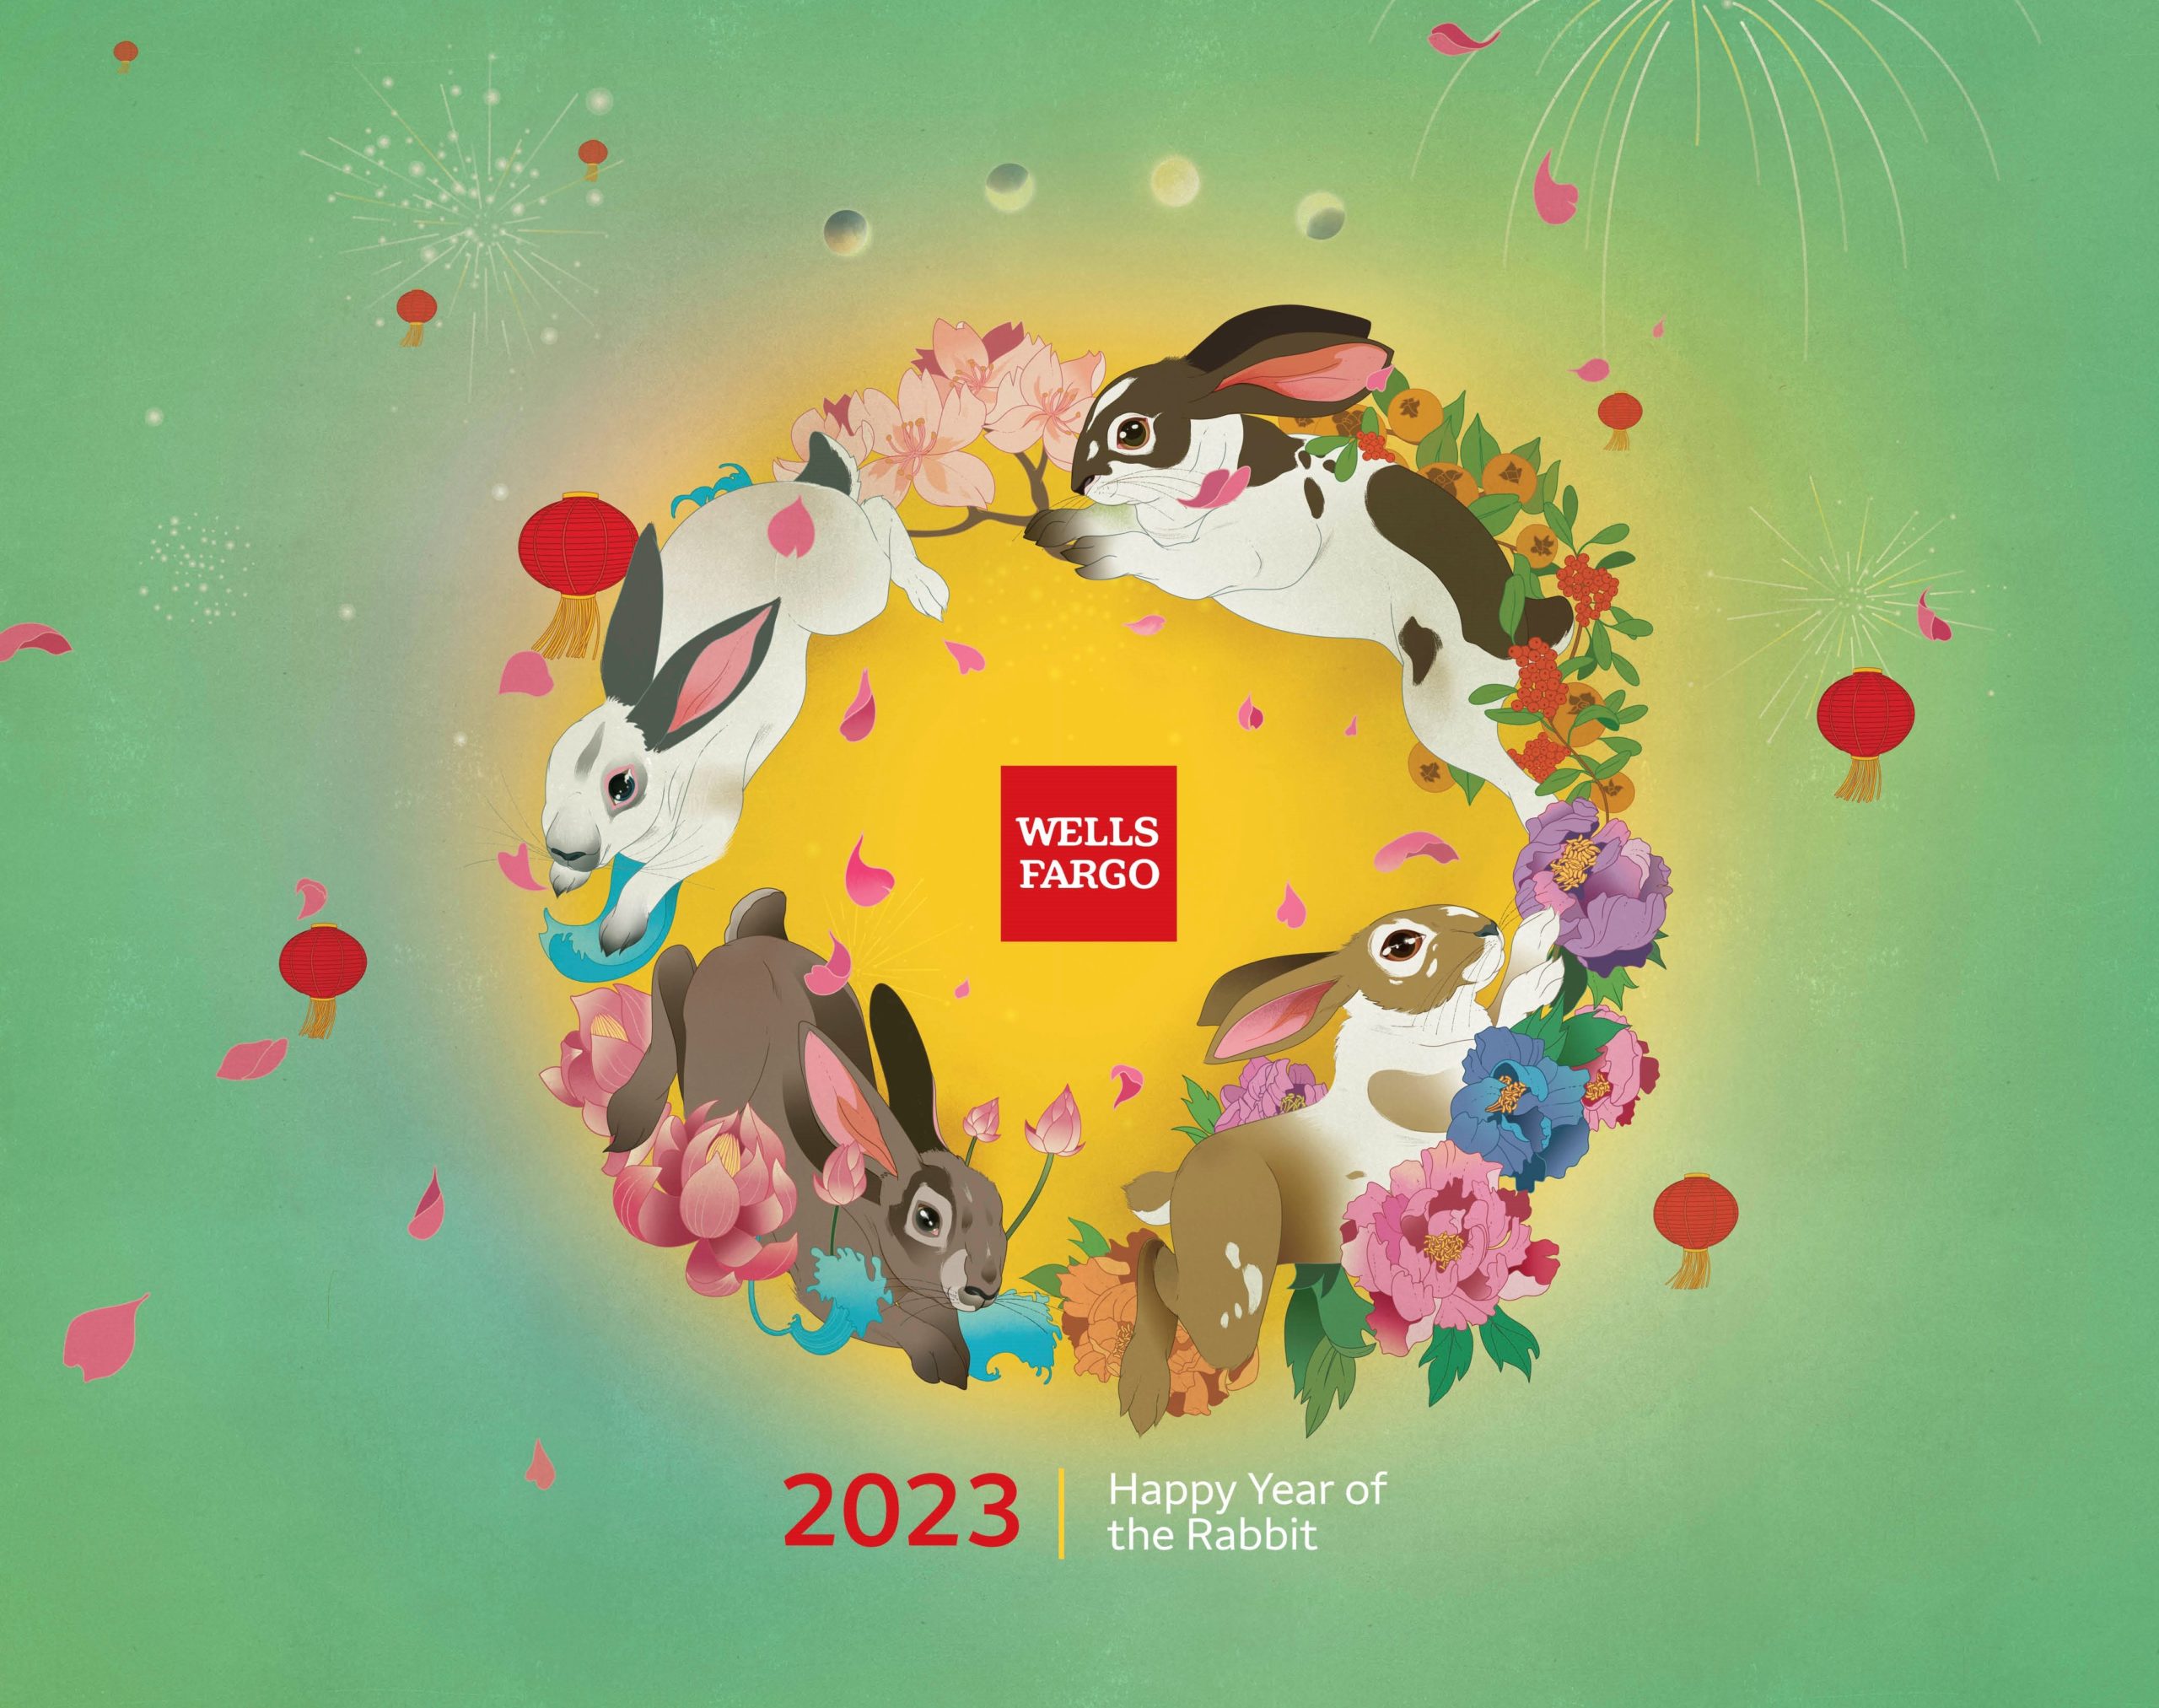 Calendar cover with illustration of Wells Fargo logo surrounded by rabbits.